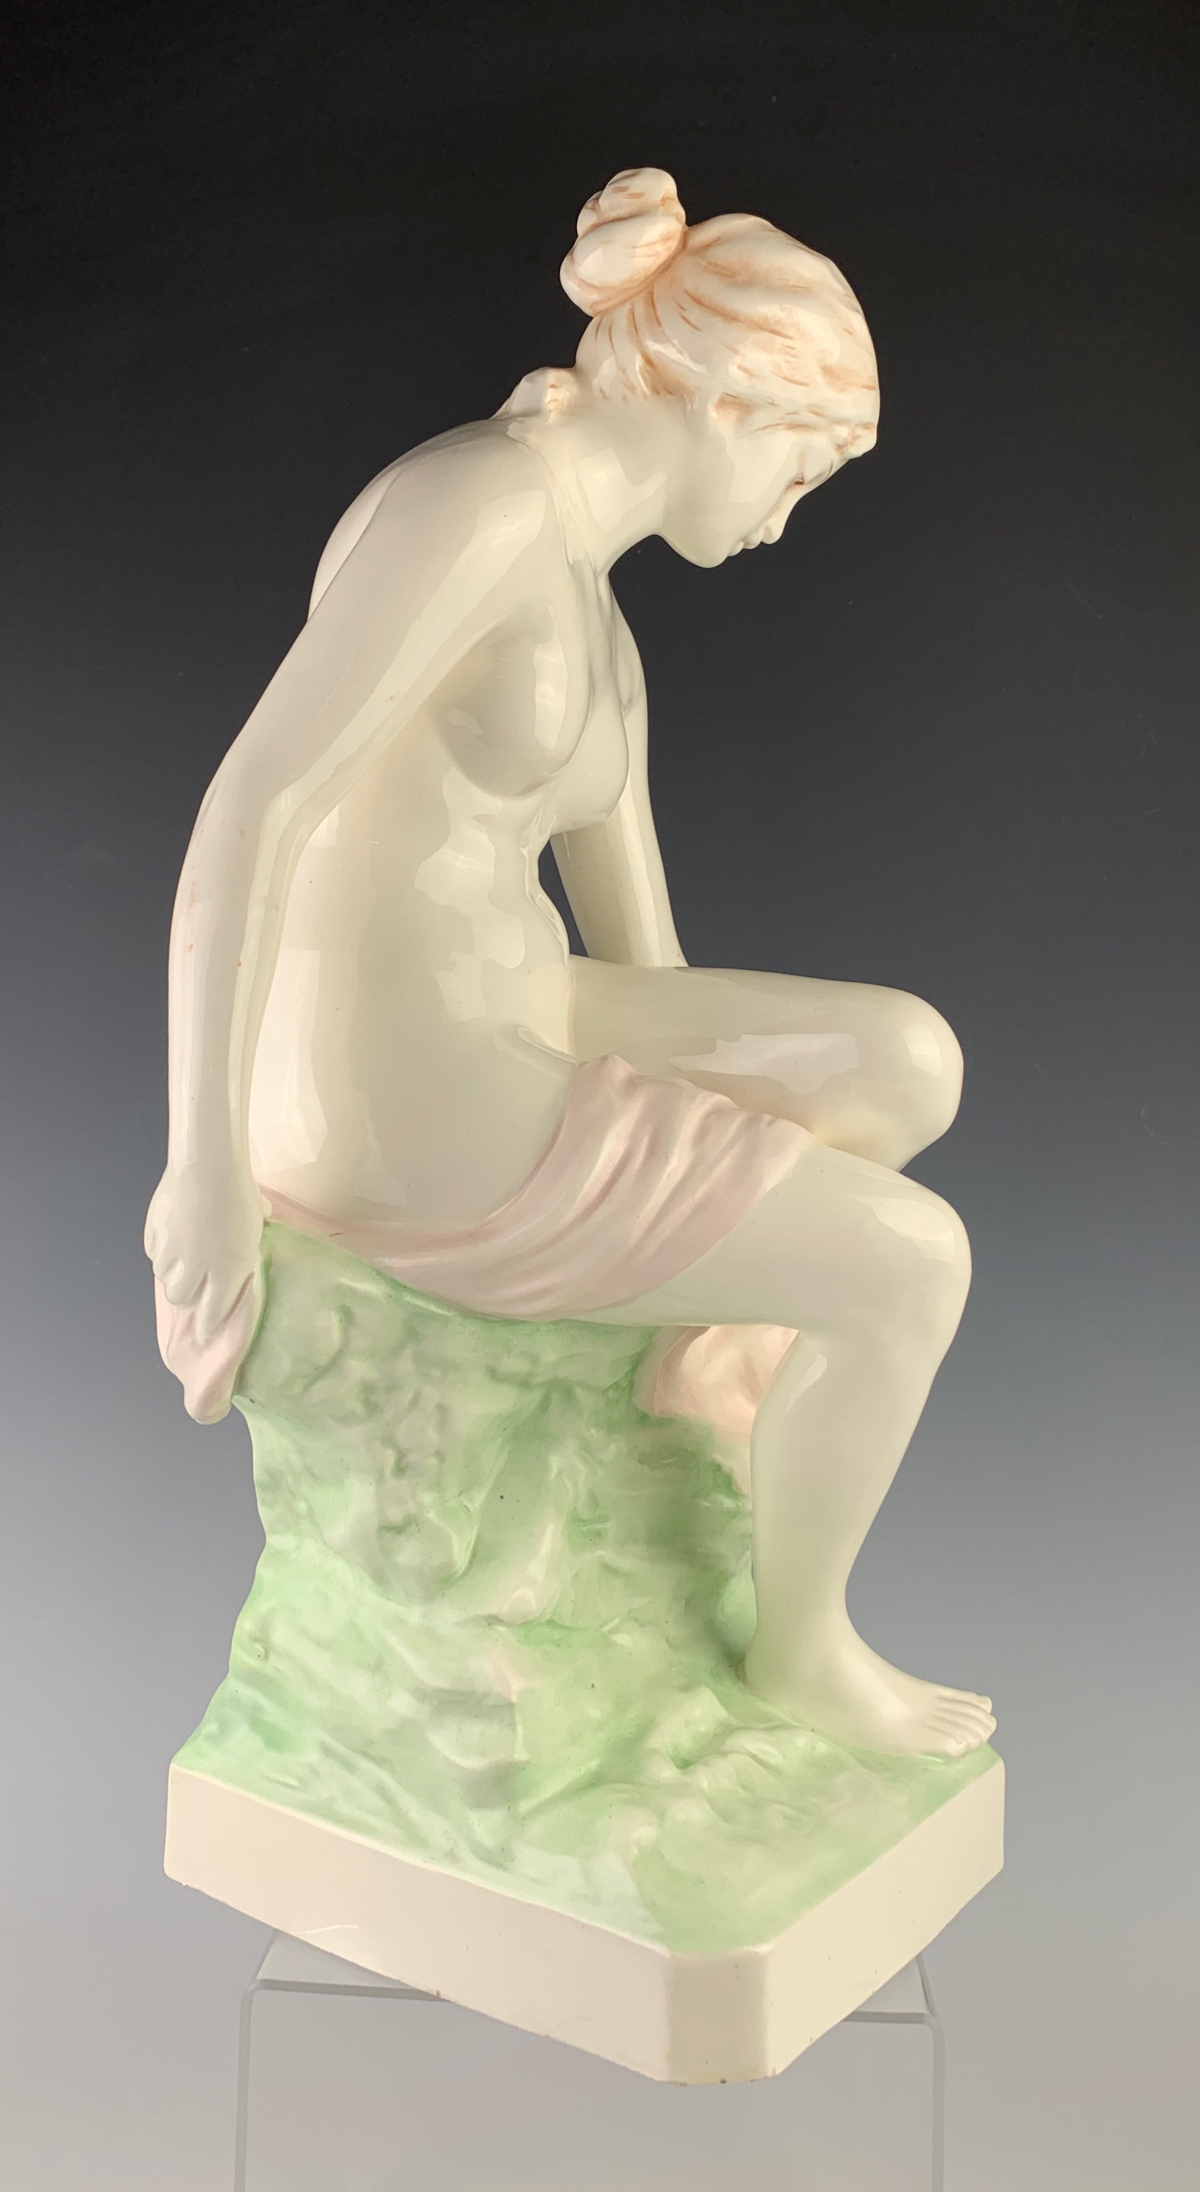 Nude Figurine by Royal Dux - Image 3 of 5